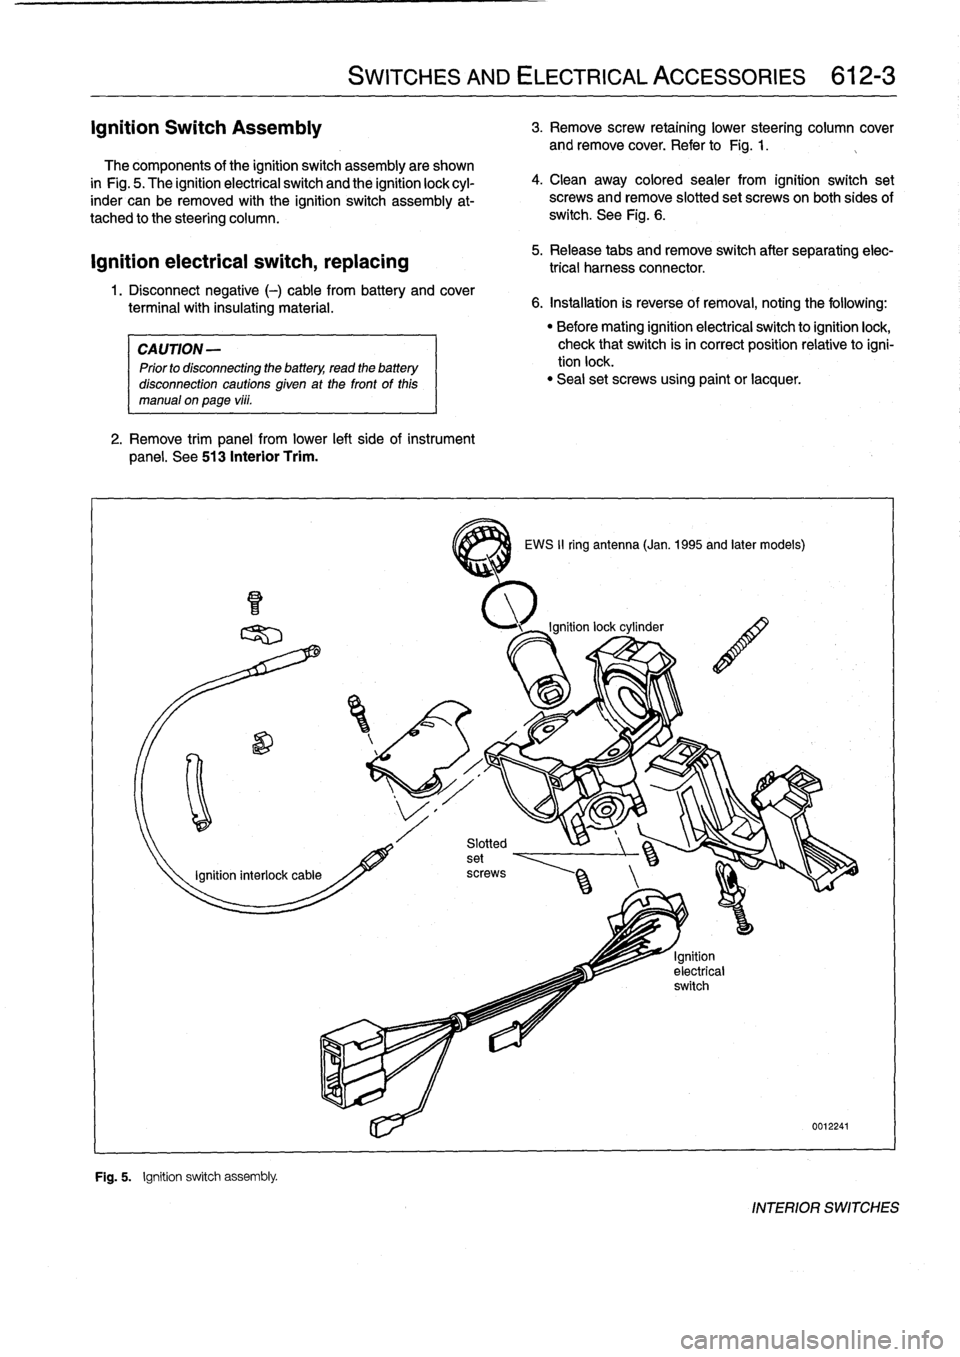 BMW 328i 1994 E36 Owners Guide 
Ignition
Switch
ASsembly

	

3
.
Remove
screw
retaining
lower
steering
column
cover
and
remove
cover
.
Refer
to
Fig
.
1
.

	

,

The
components
of
the
ignition
switch
assembly
are
shown

in
Fig
.
5
.